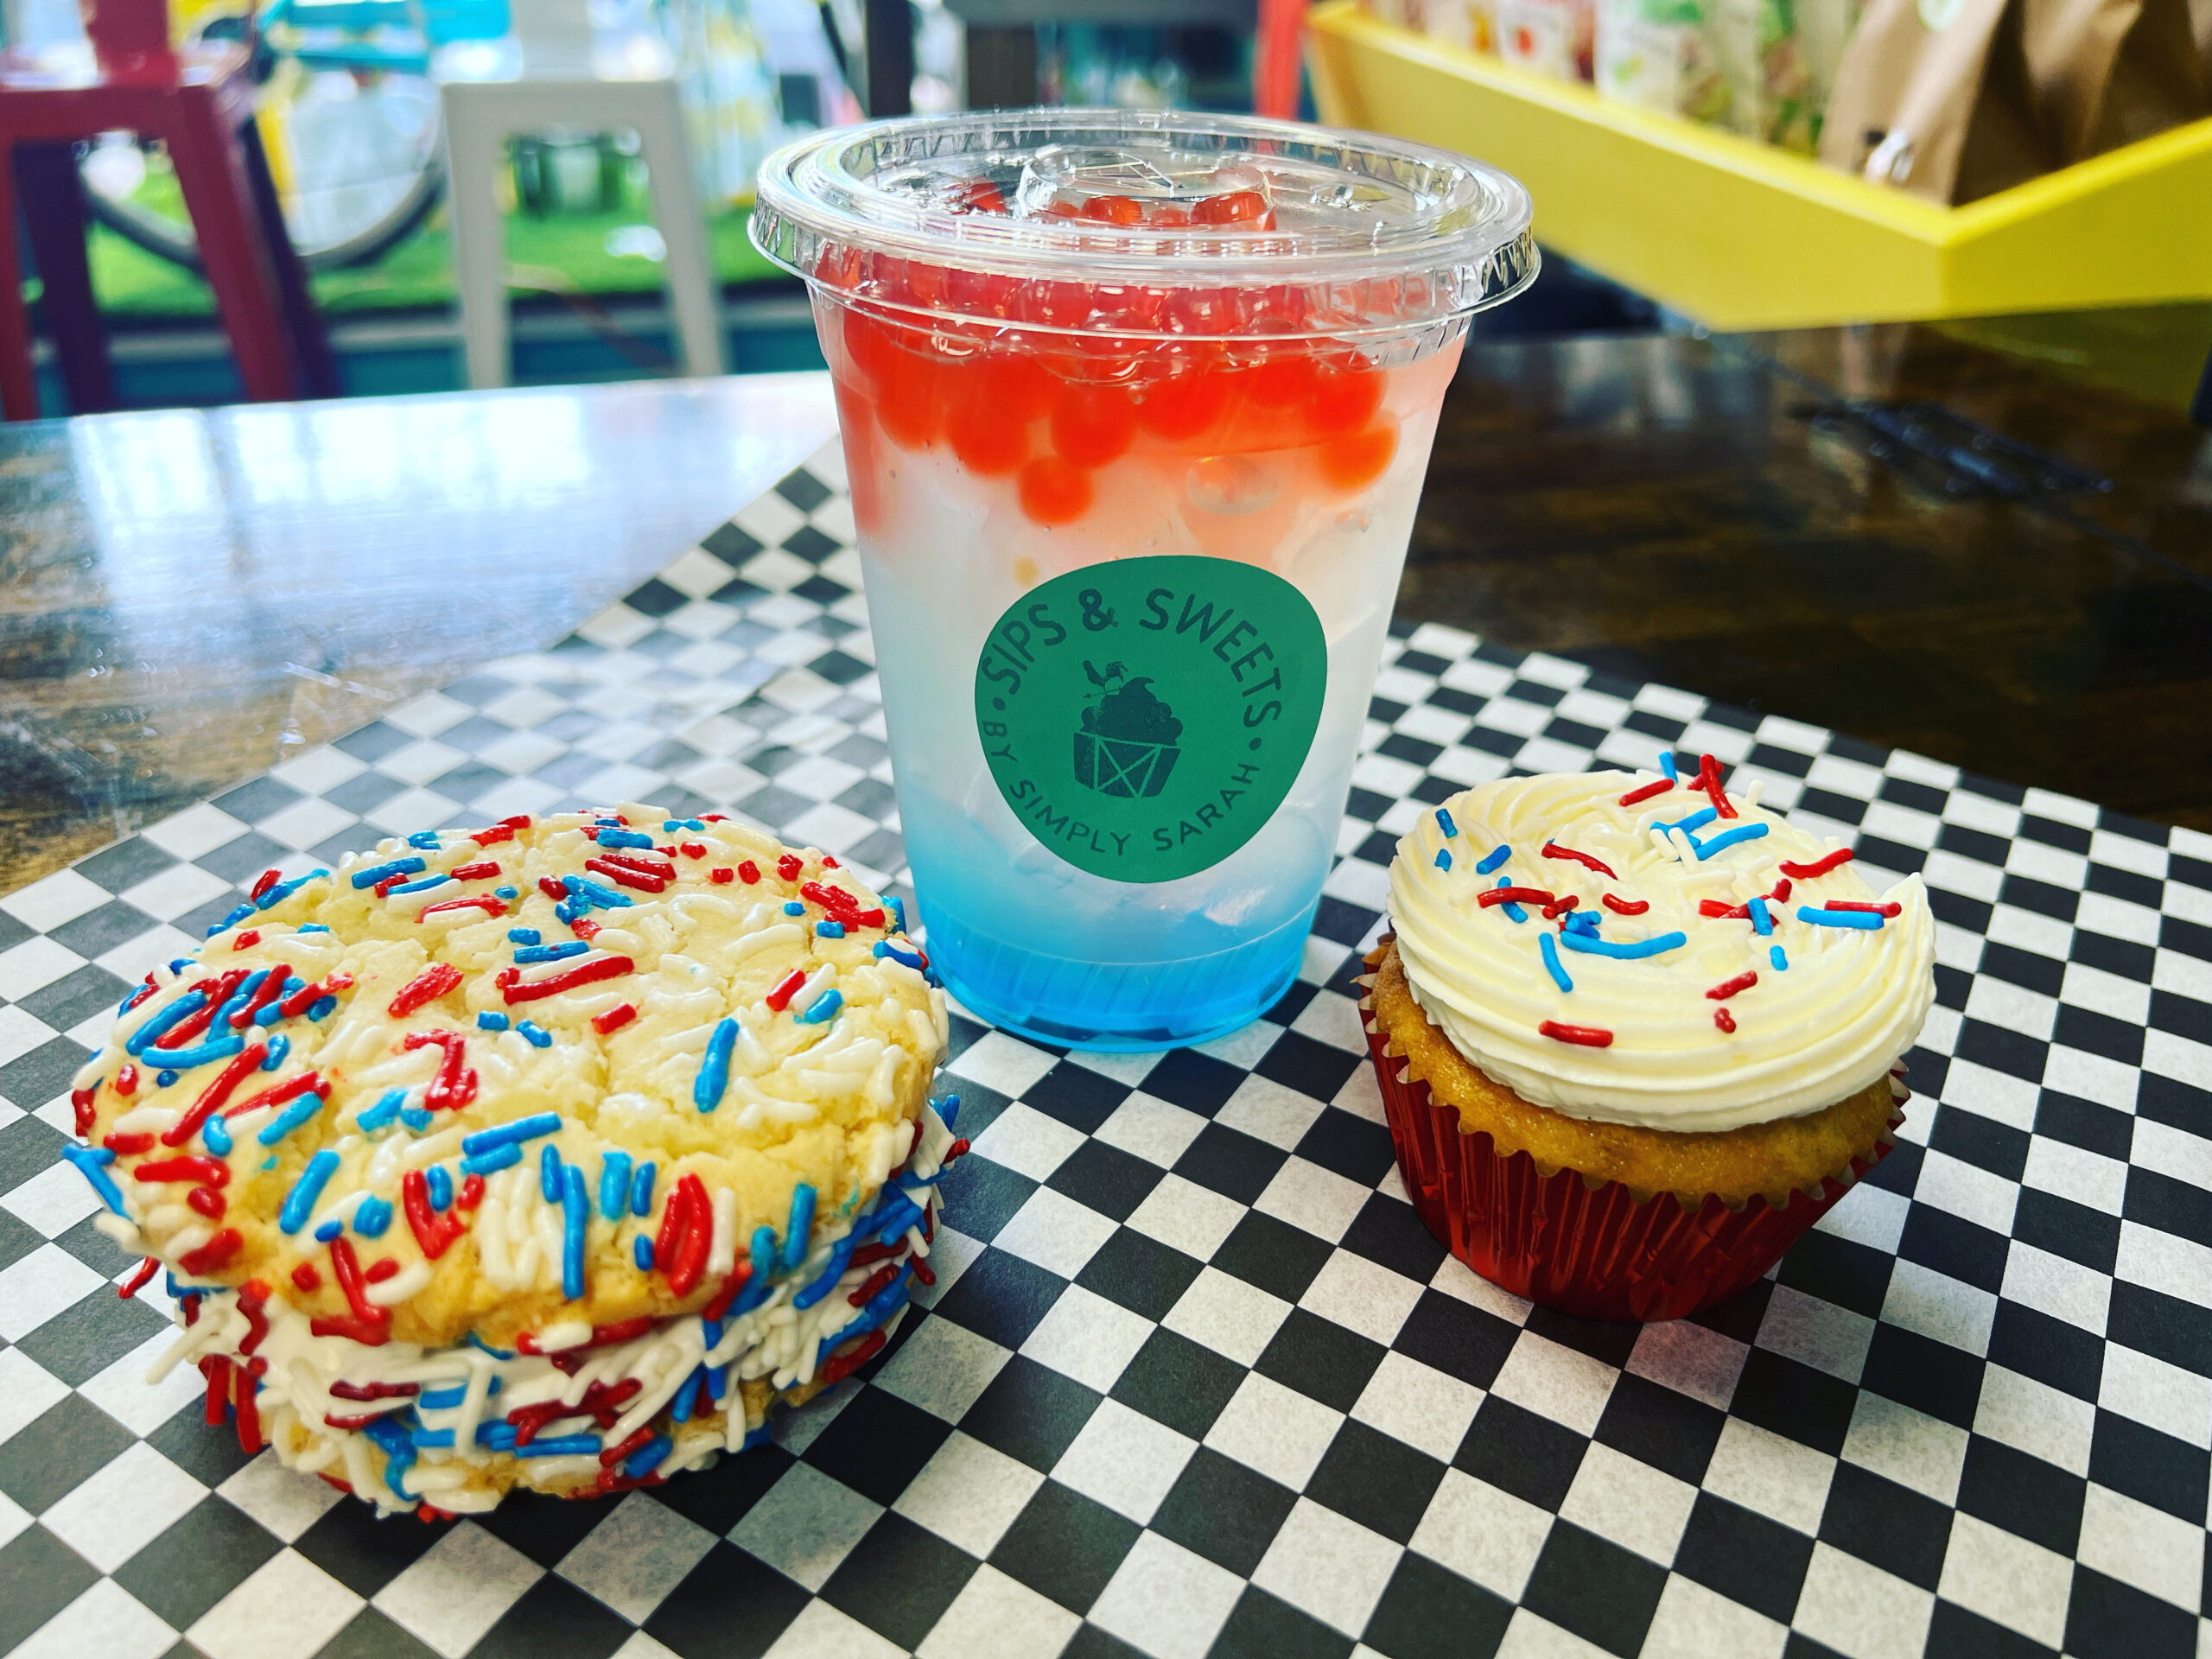 A photo of a 4th of July themed cookiewich, bubble tea, and cupcake at Sips & Sweets.